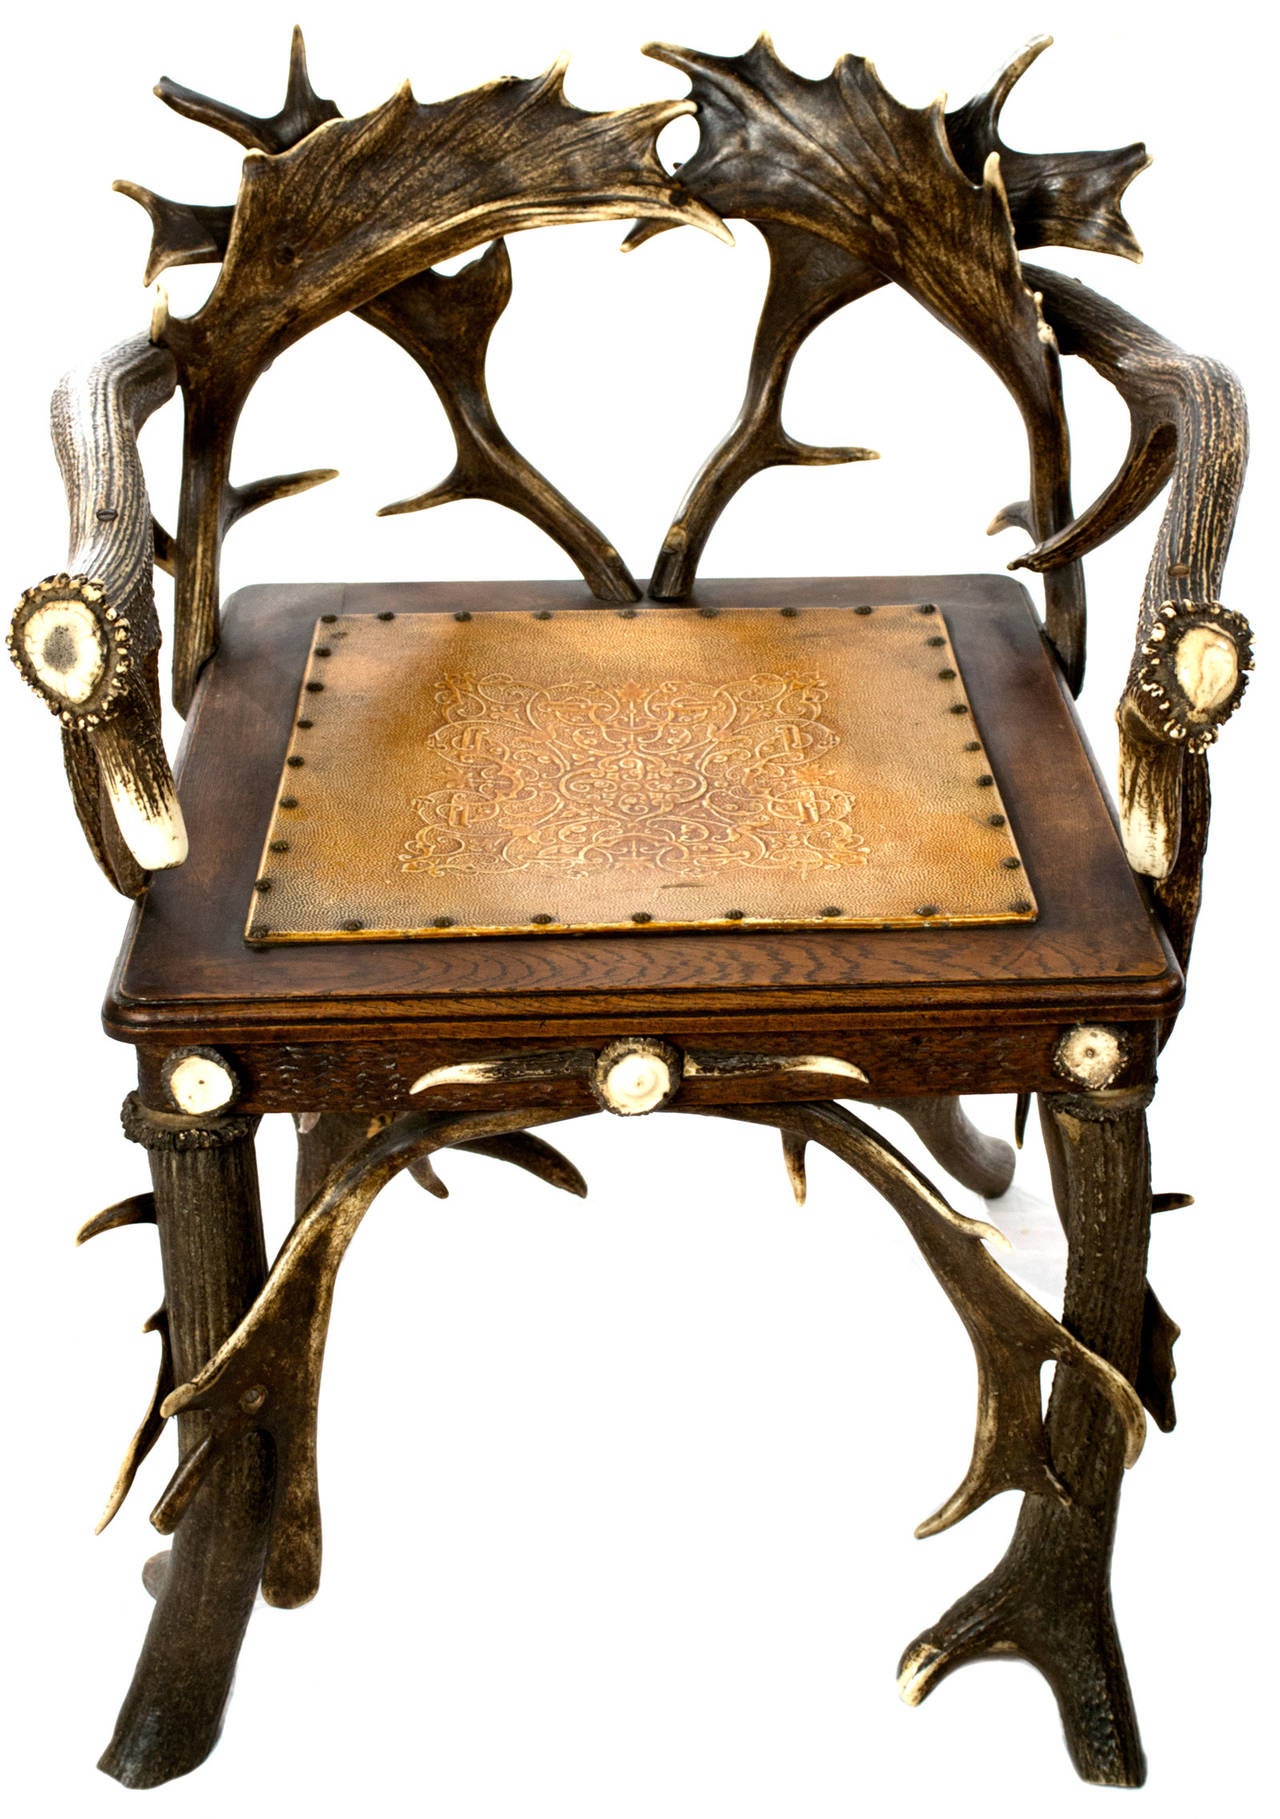 Two nineteenth-century Black-Forest arm chairs with the arms, back, and legs made from fallow and red deer antlers, the seat from hand-tooled leather and walnut.